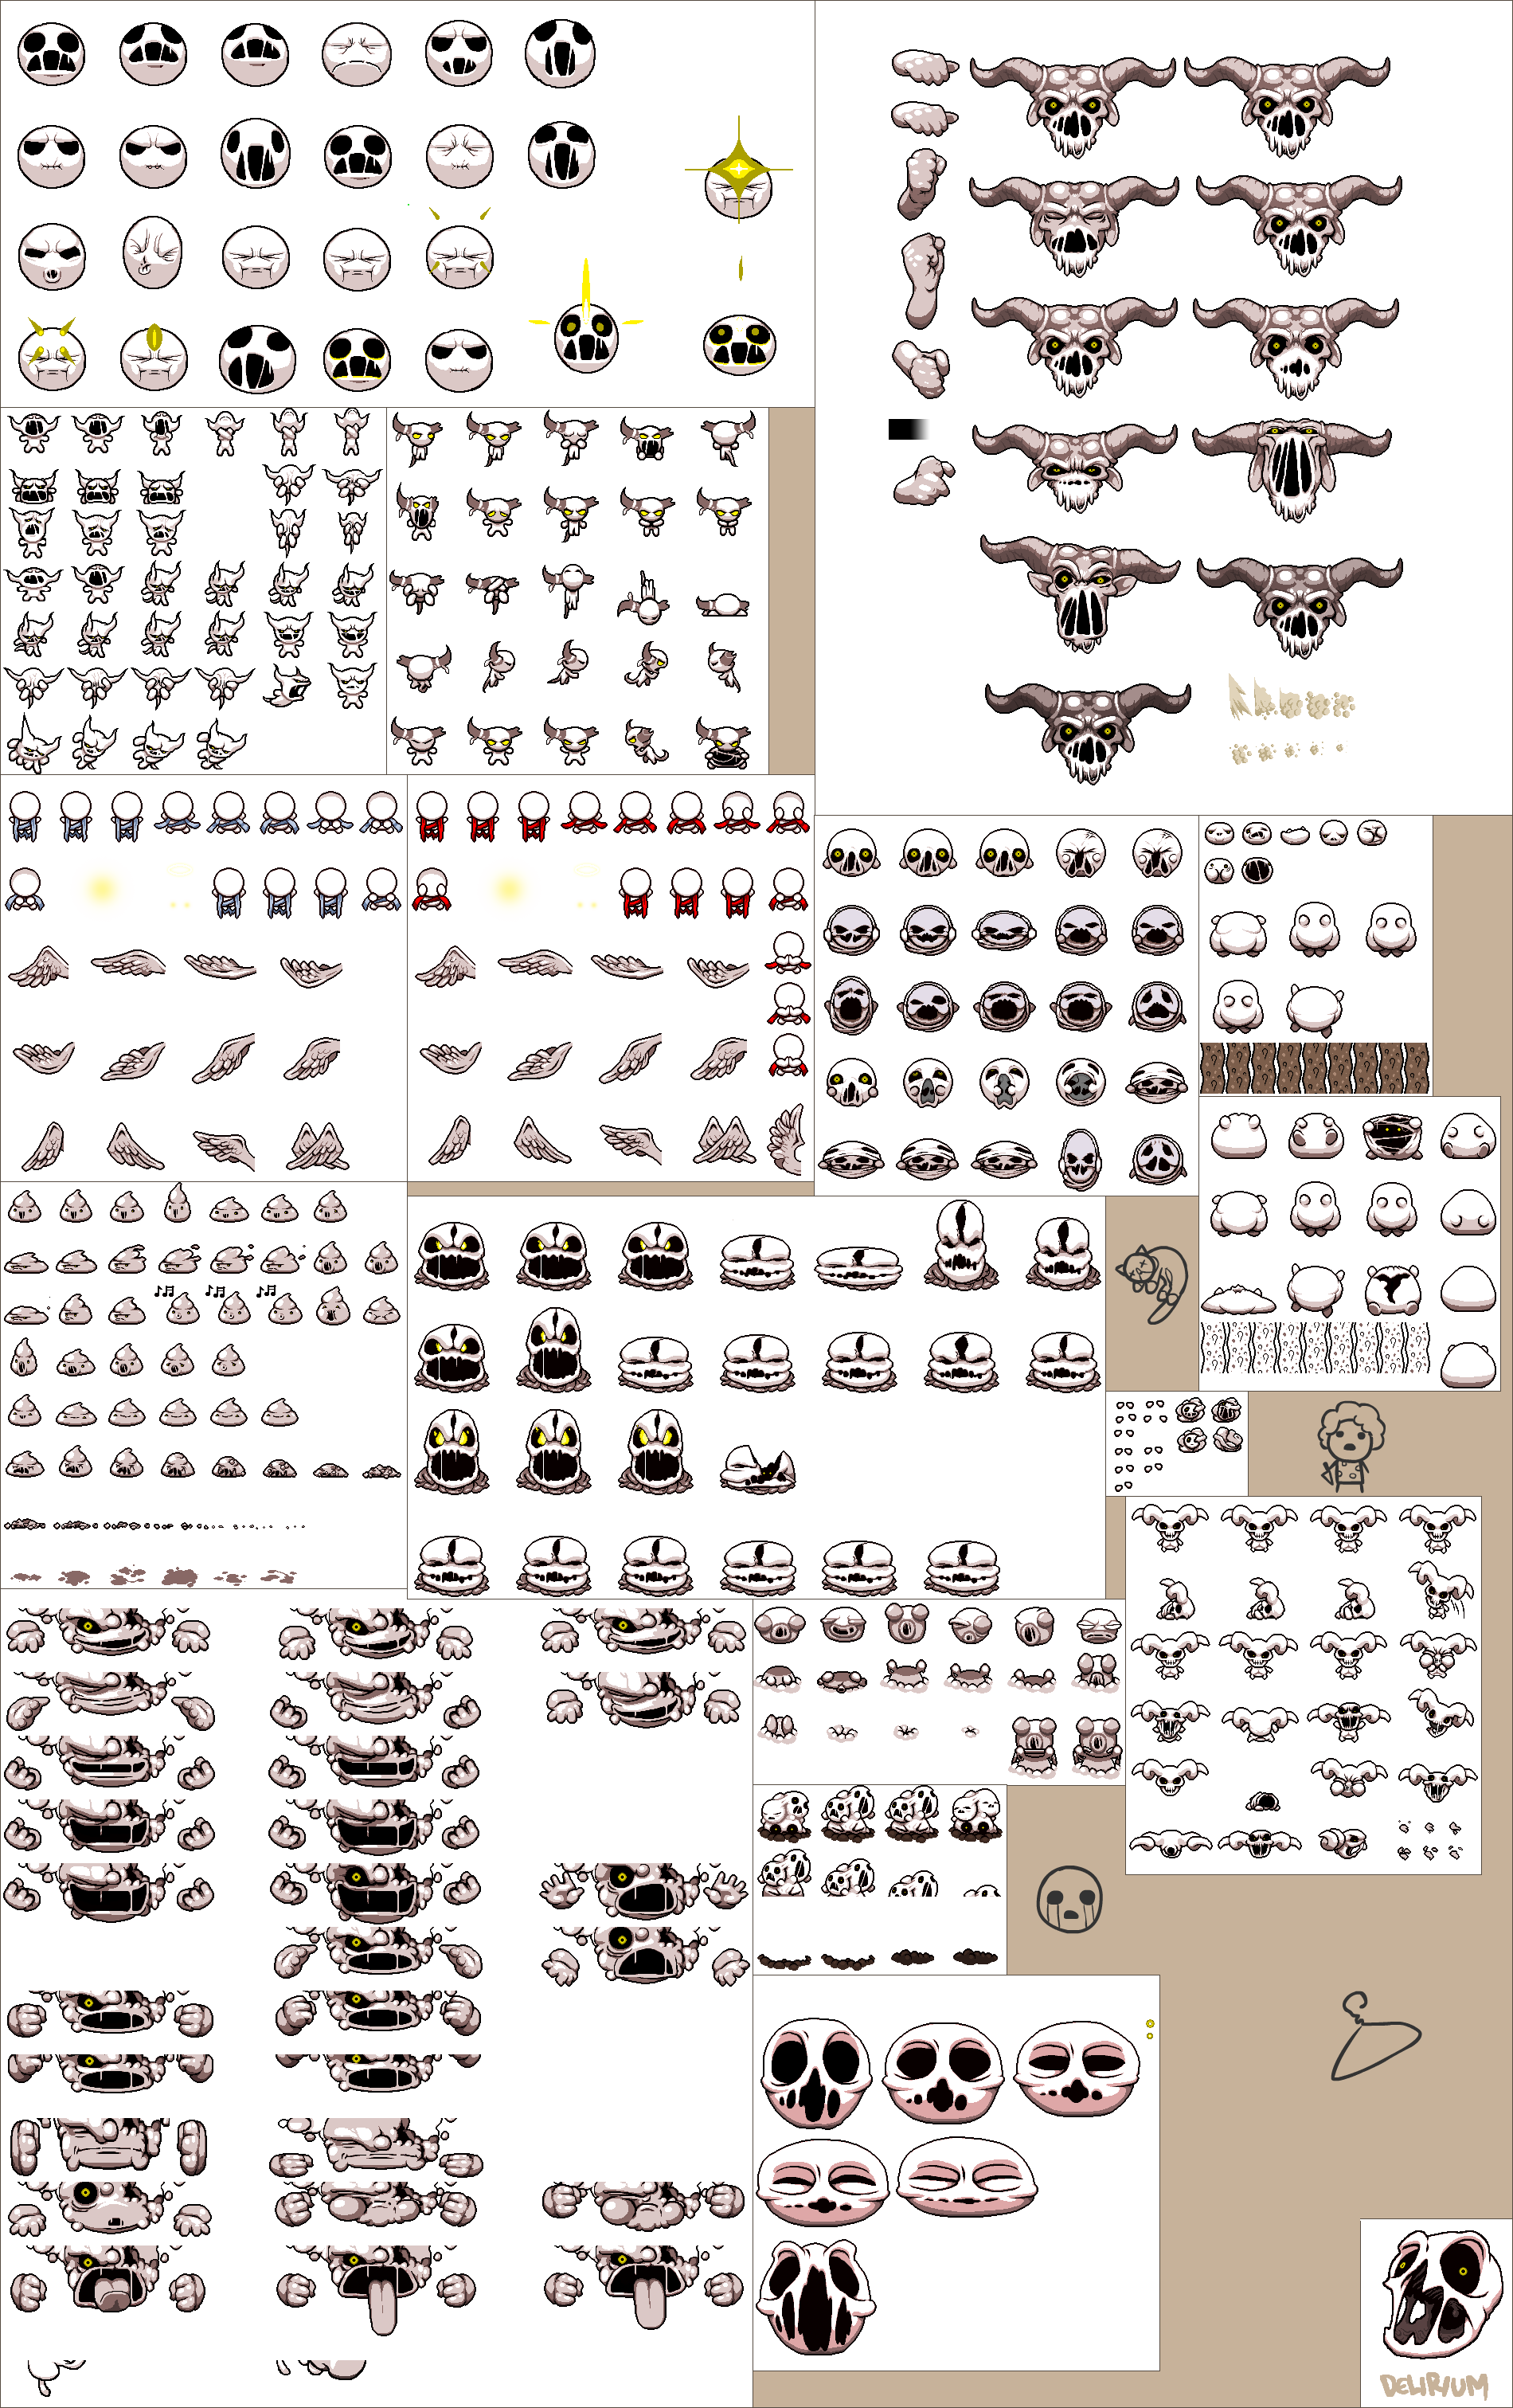 The Binding of Isaac: Rebirth - Delirium Forms (Rebirth)